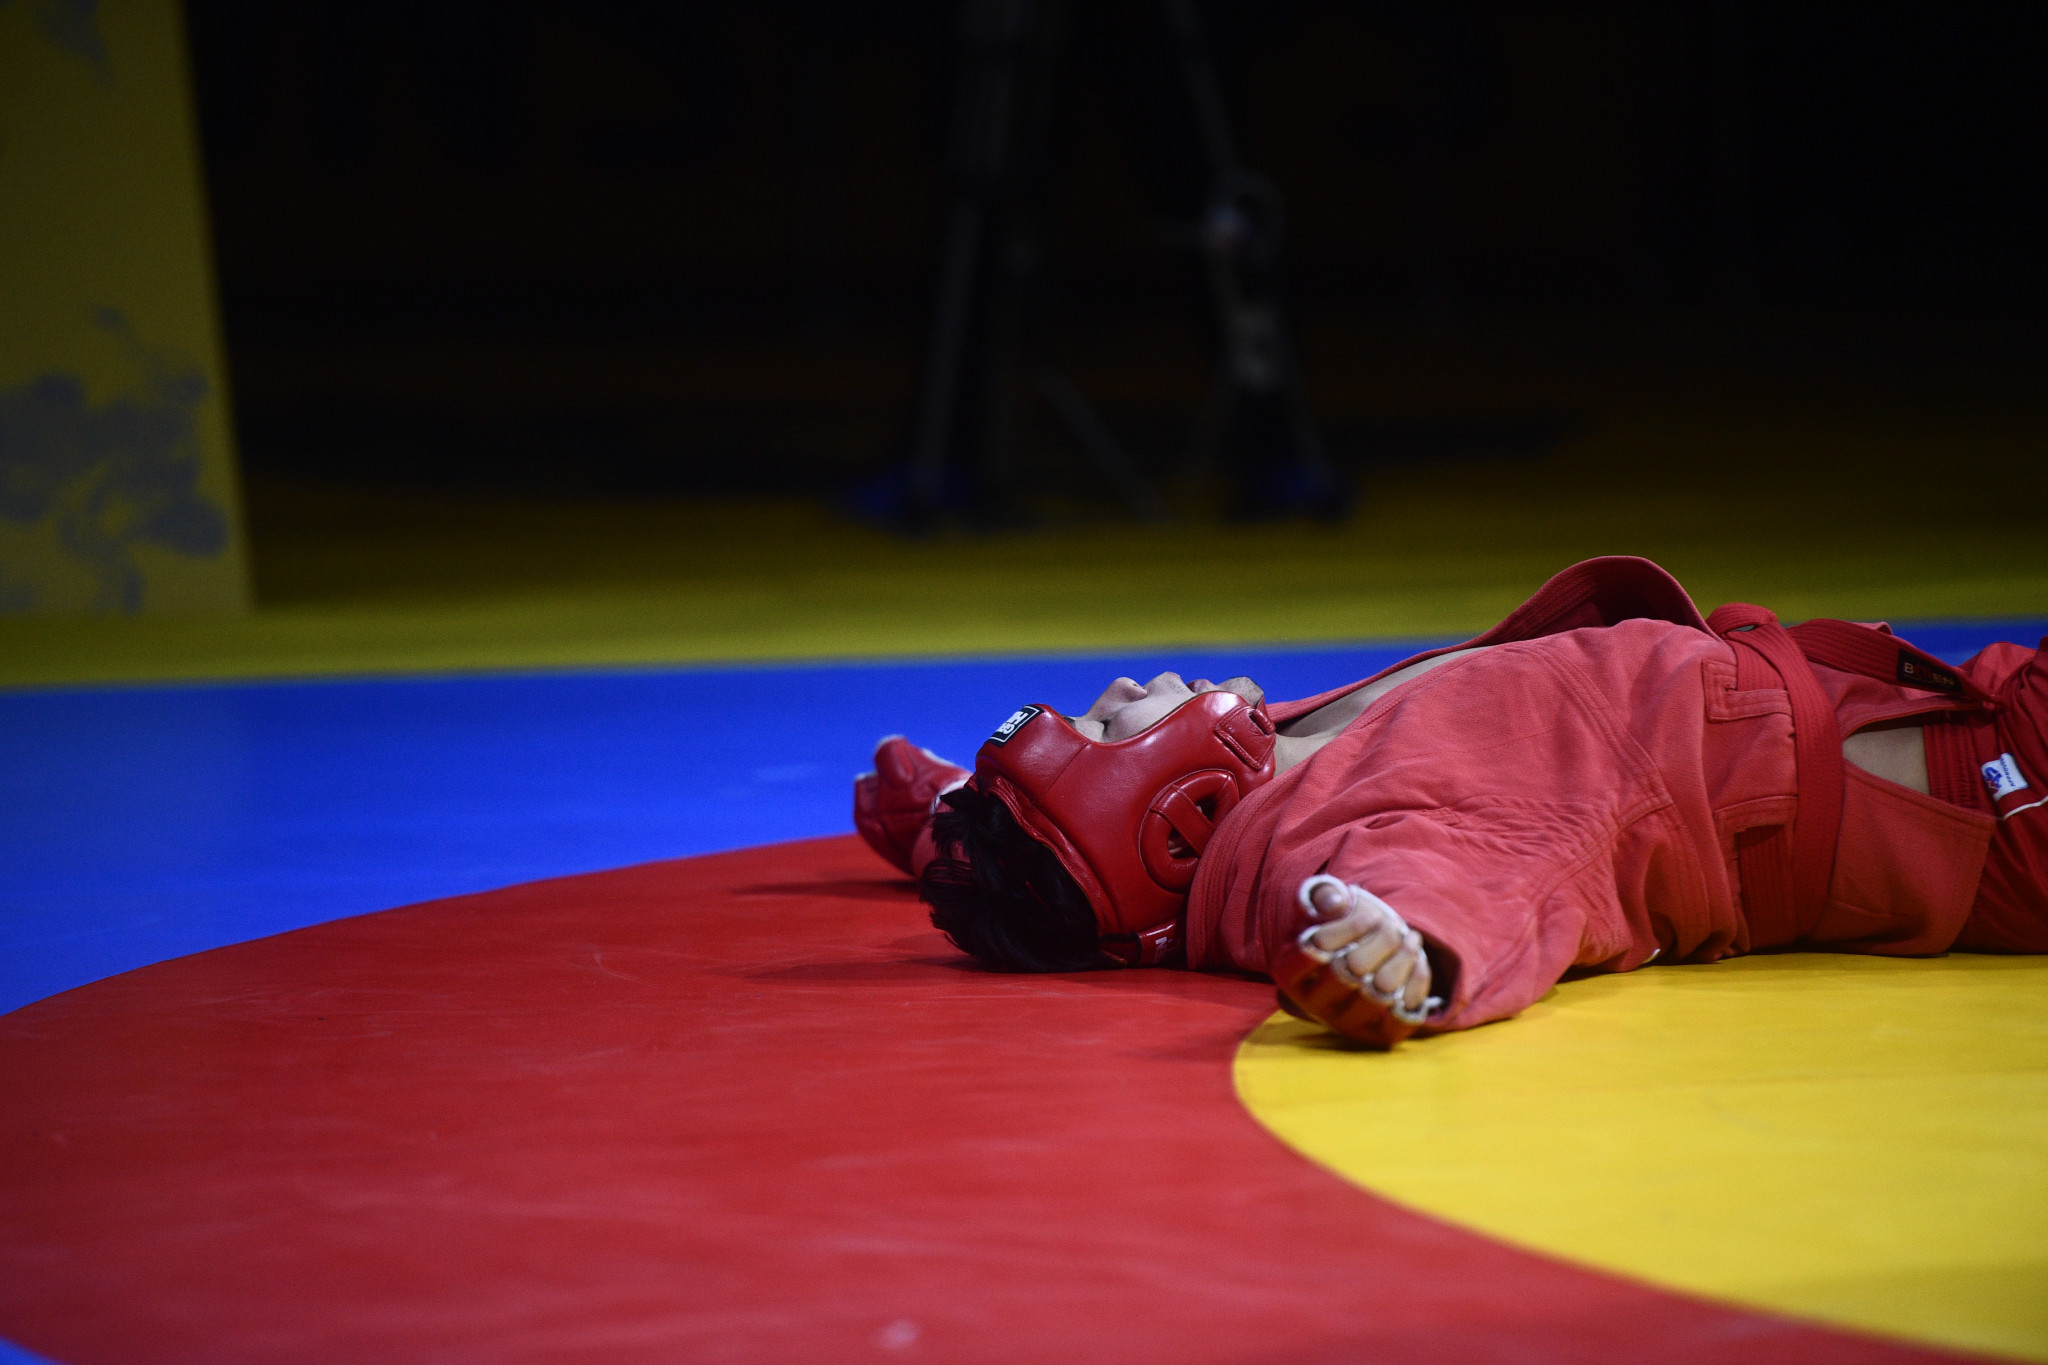 Combat sambo proved tiring for some of the competitors ©FIAS 